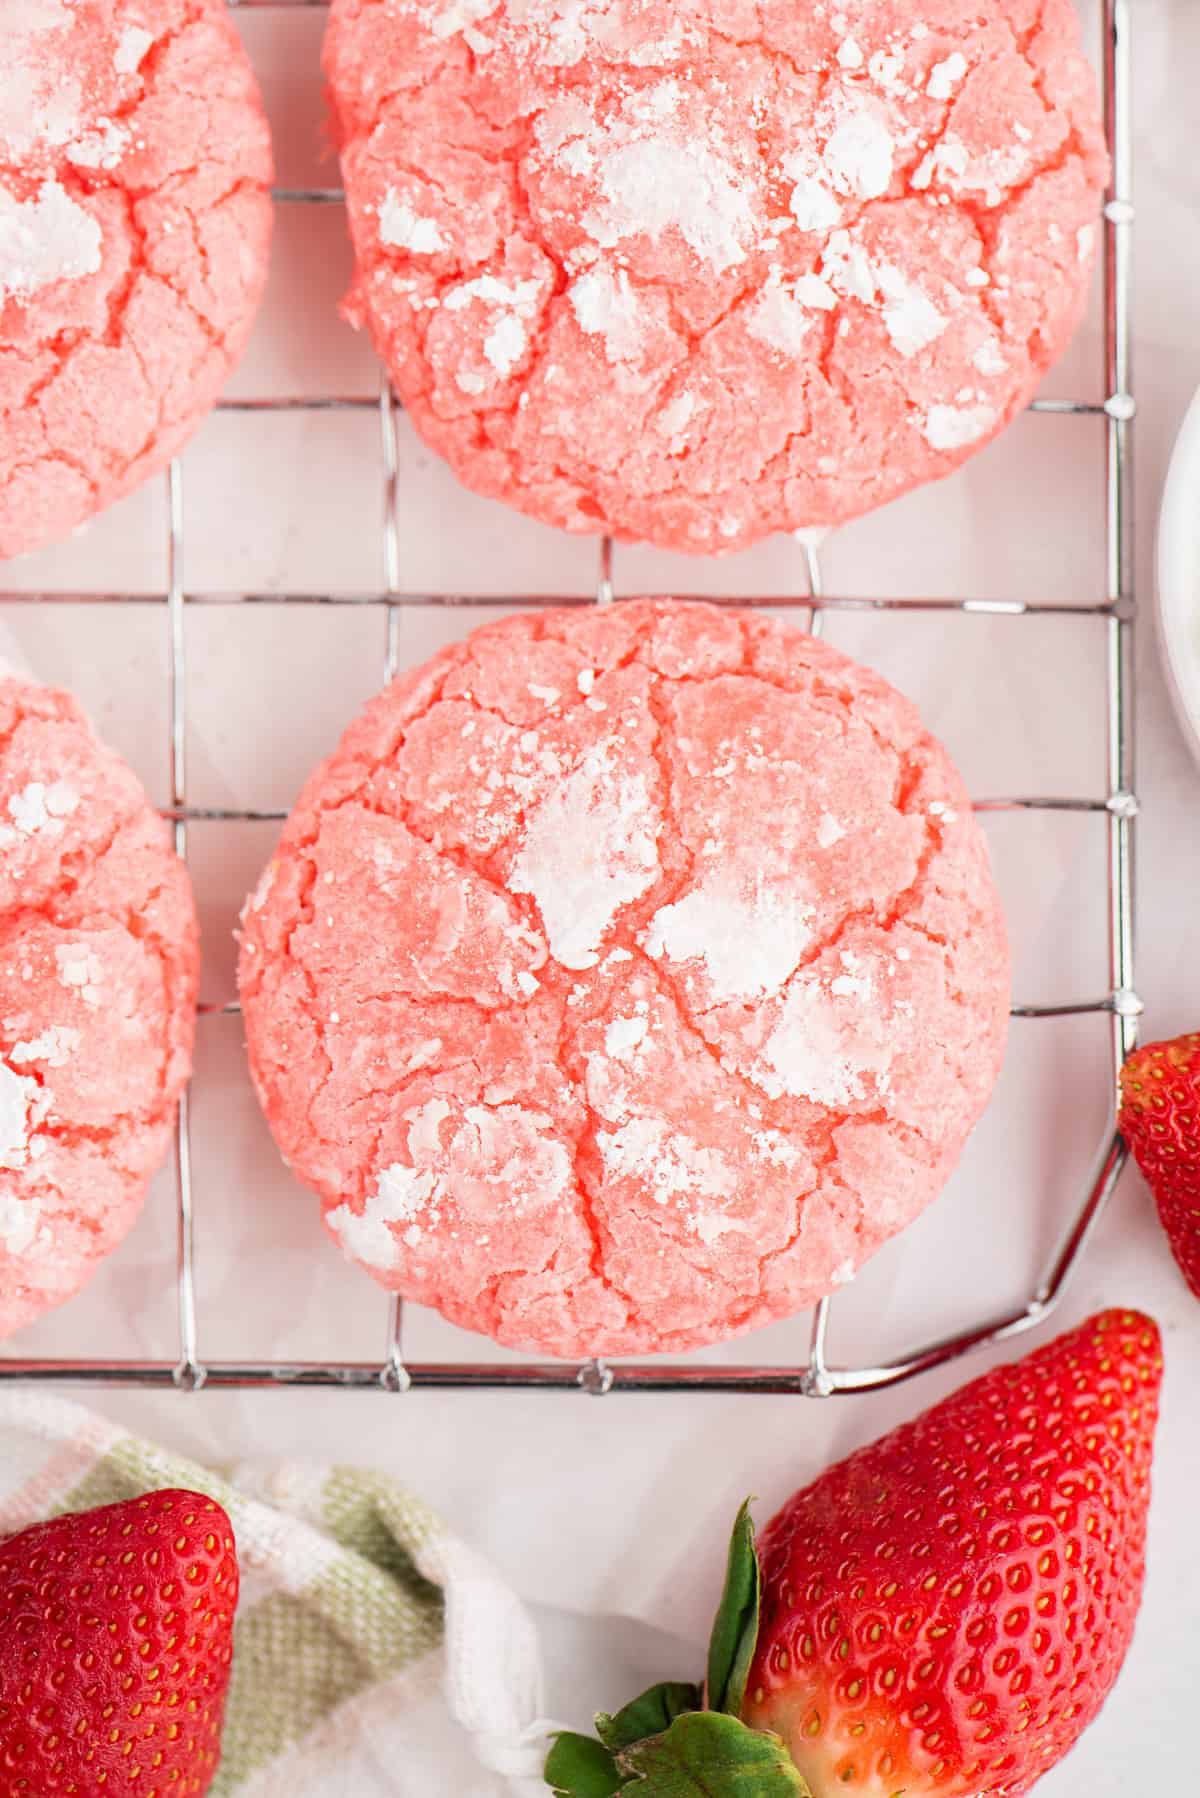 Strawberry crinkle cookies on a wire rack next to strawberries.